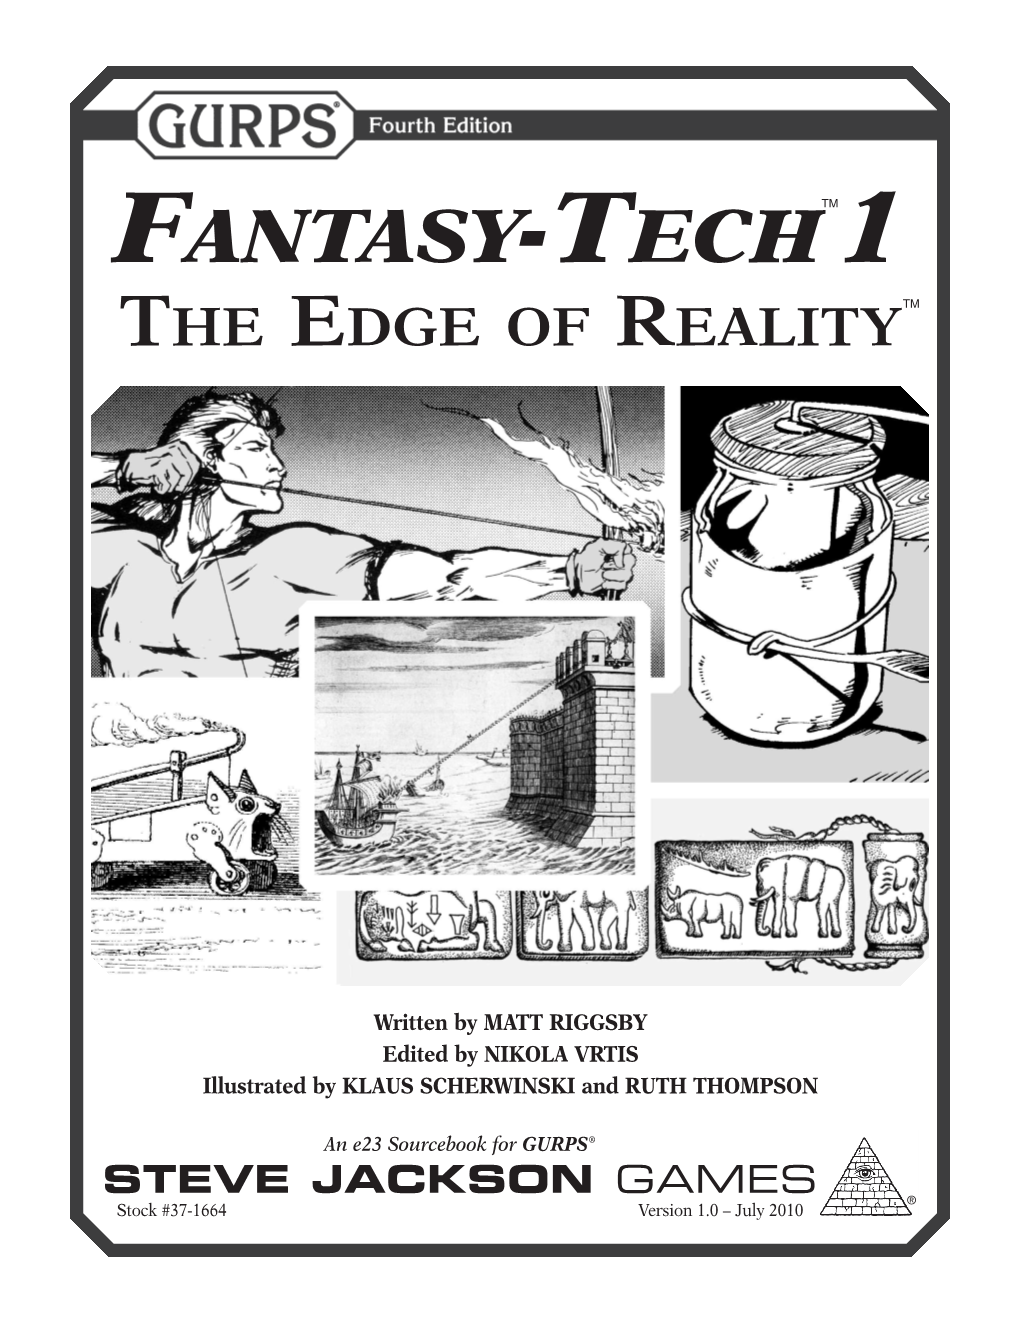 GURPS Fantasy-Tech 1: the Edge of Reality Can Be Found at Floral Clock (TL4)